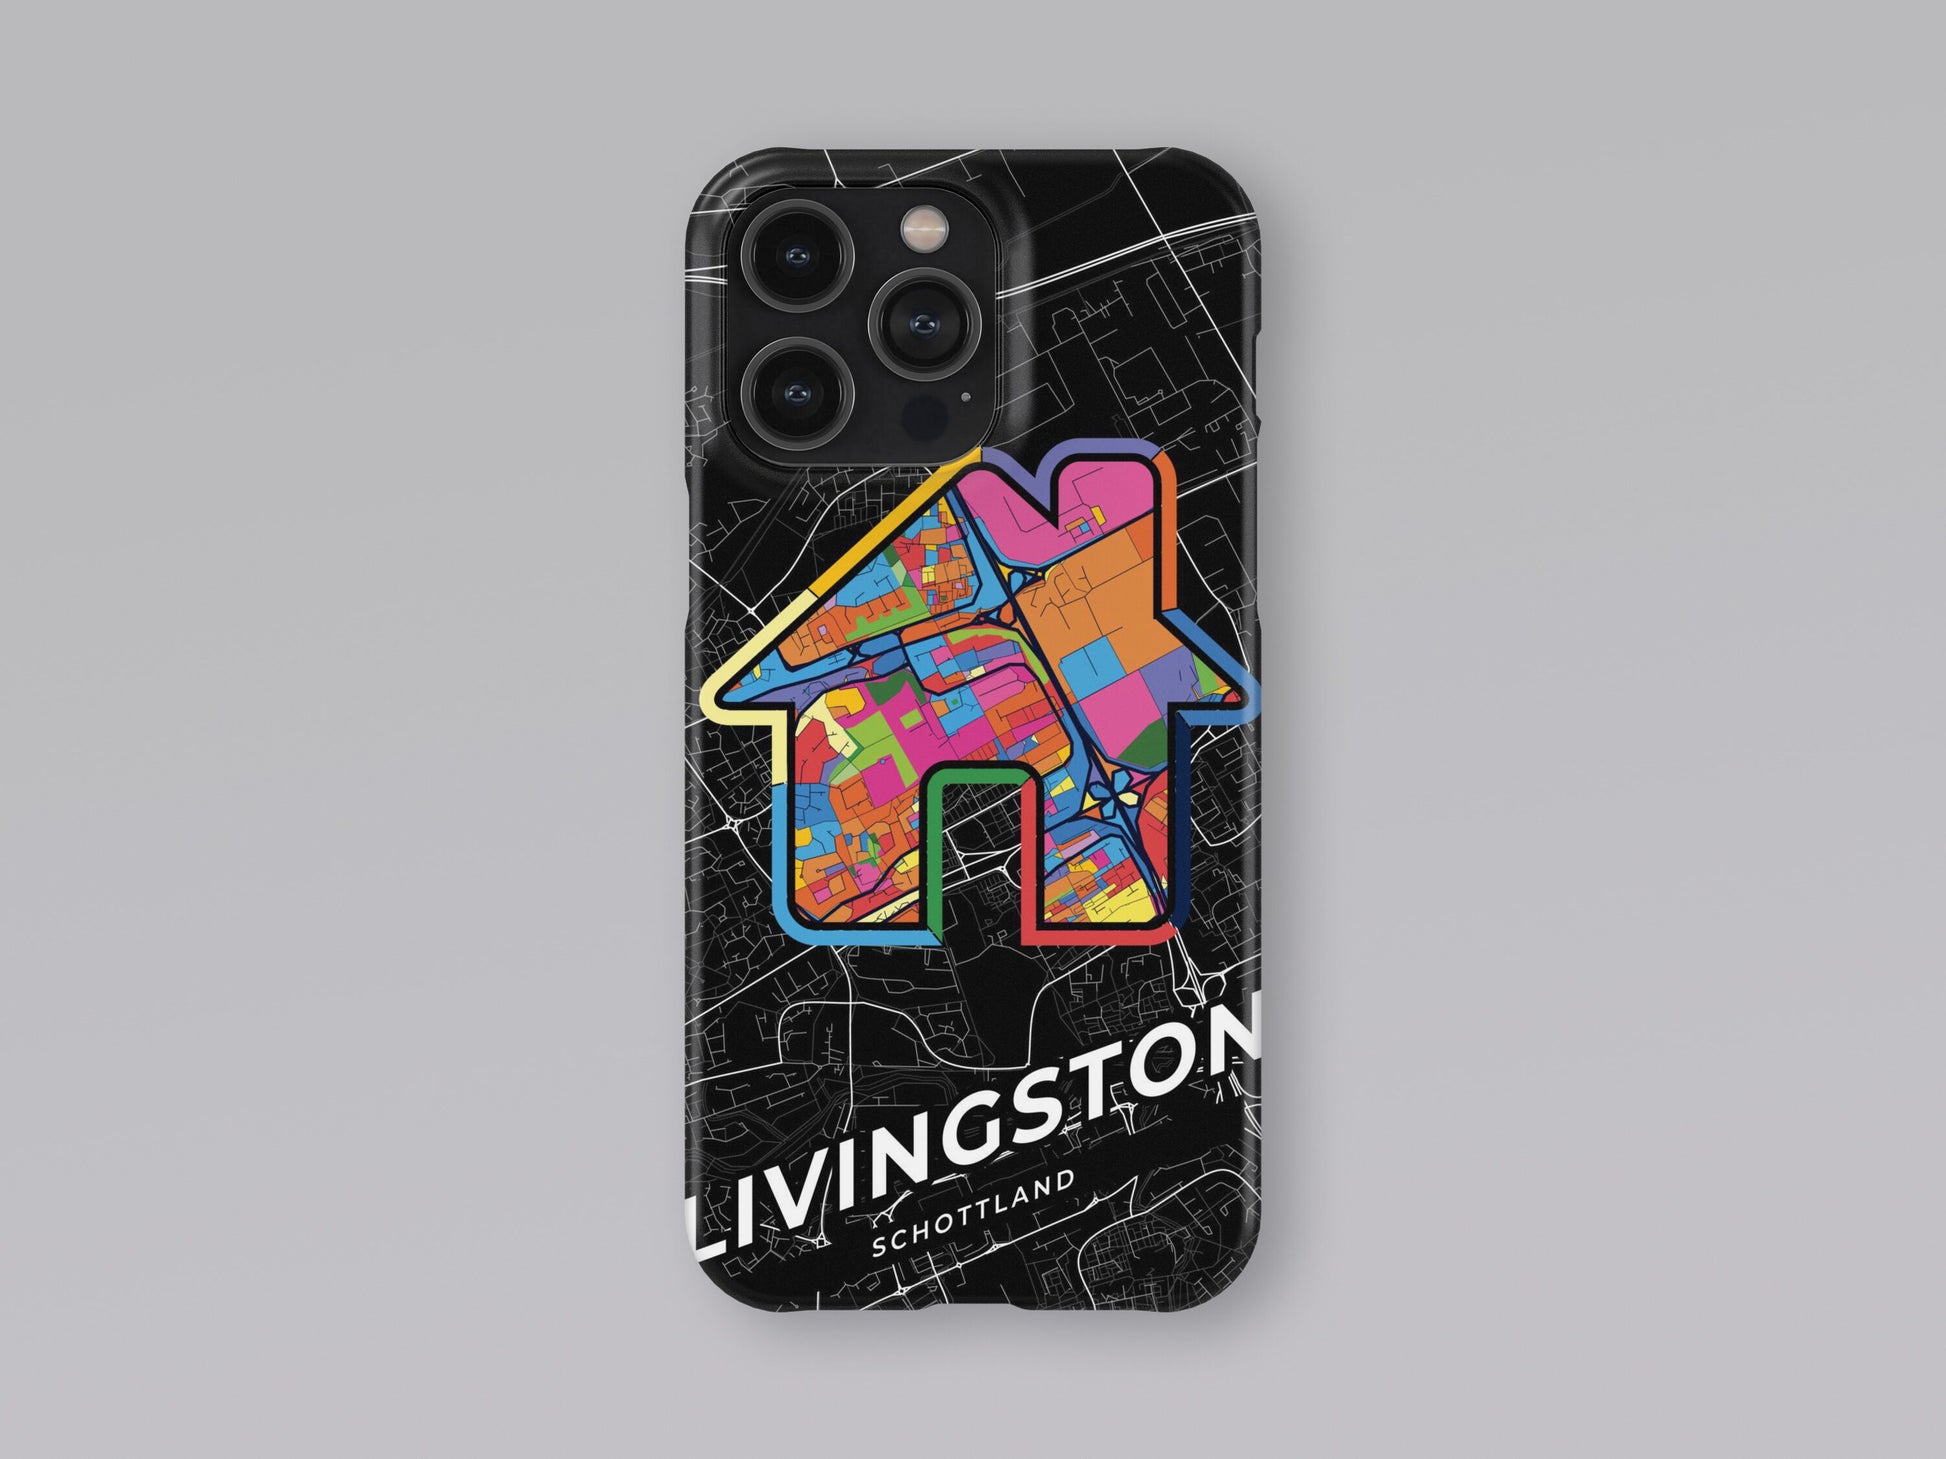 Livingston Scotland slim phone case with colorful icon. Birthday, wedding or housewarming gift. Couple match cases. 3